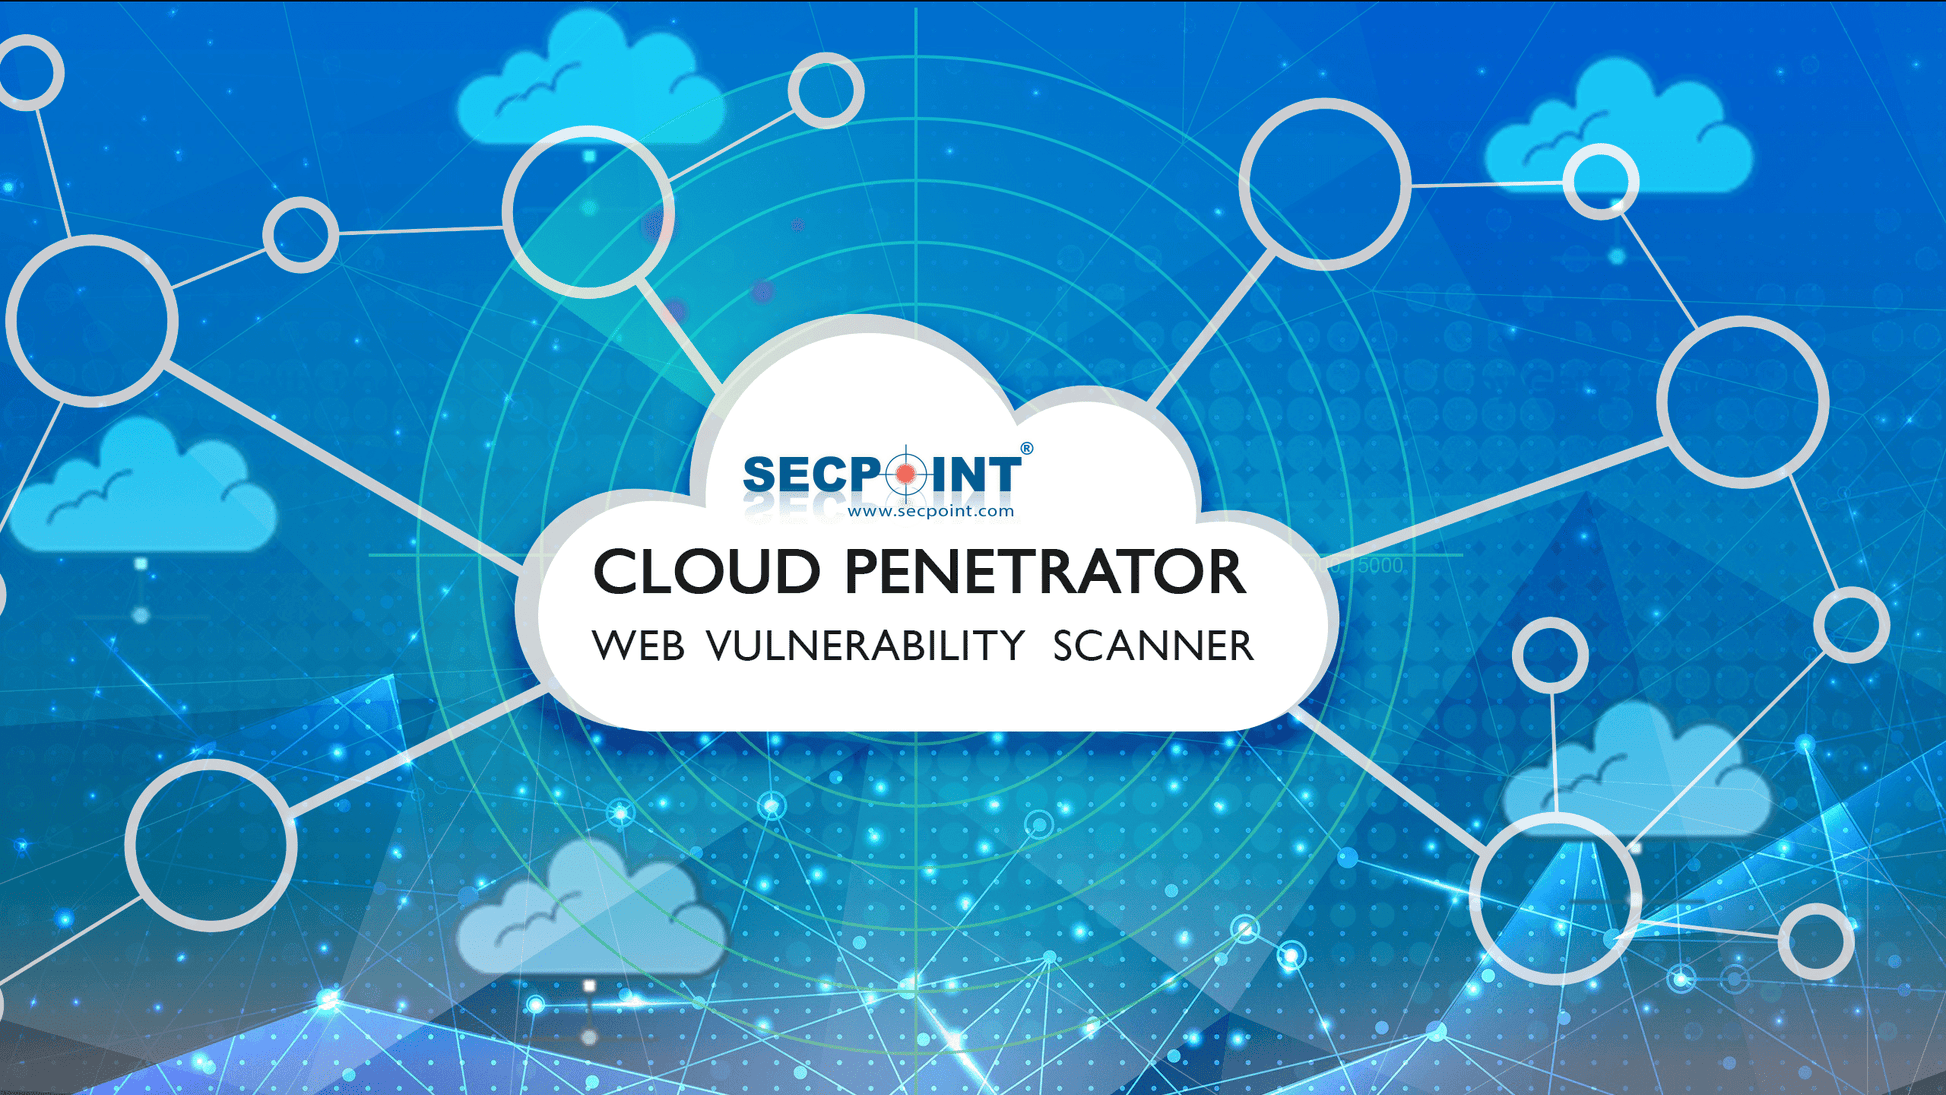 SecPoint Cloud Penetrator S9 - Vulnerability Scanning of 4 IPs for 3 Years Static Scan License - SecPoint